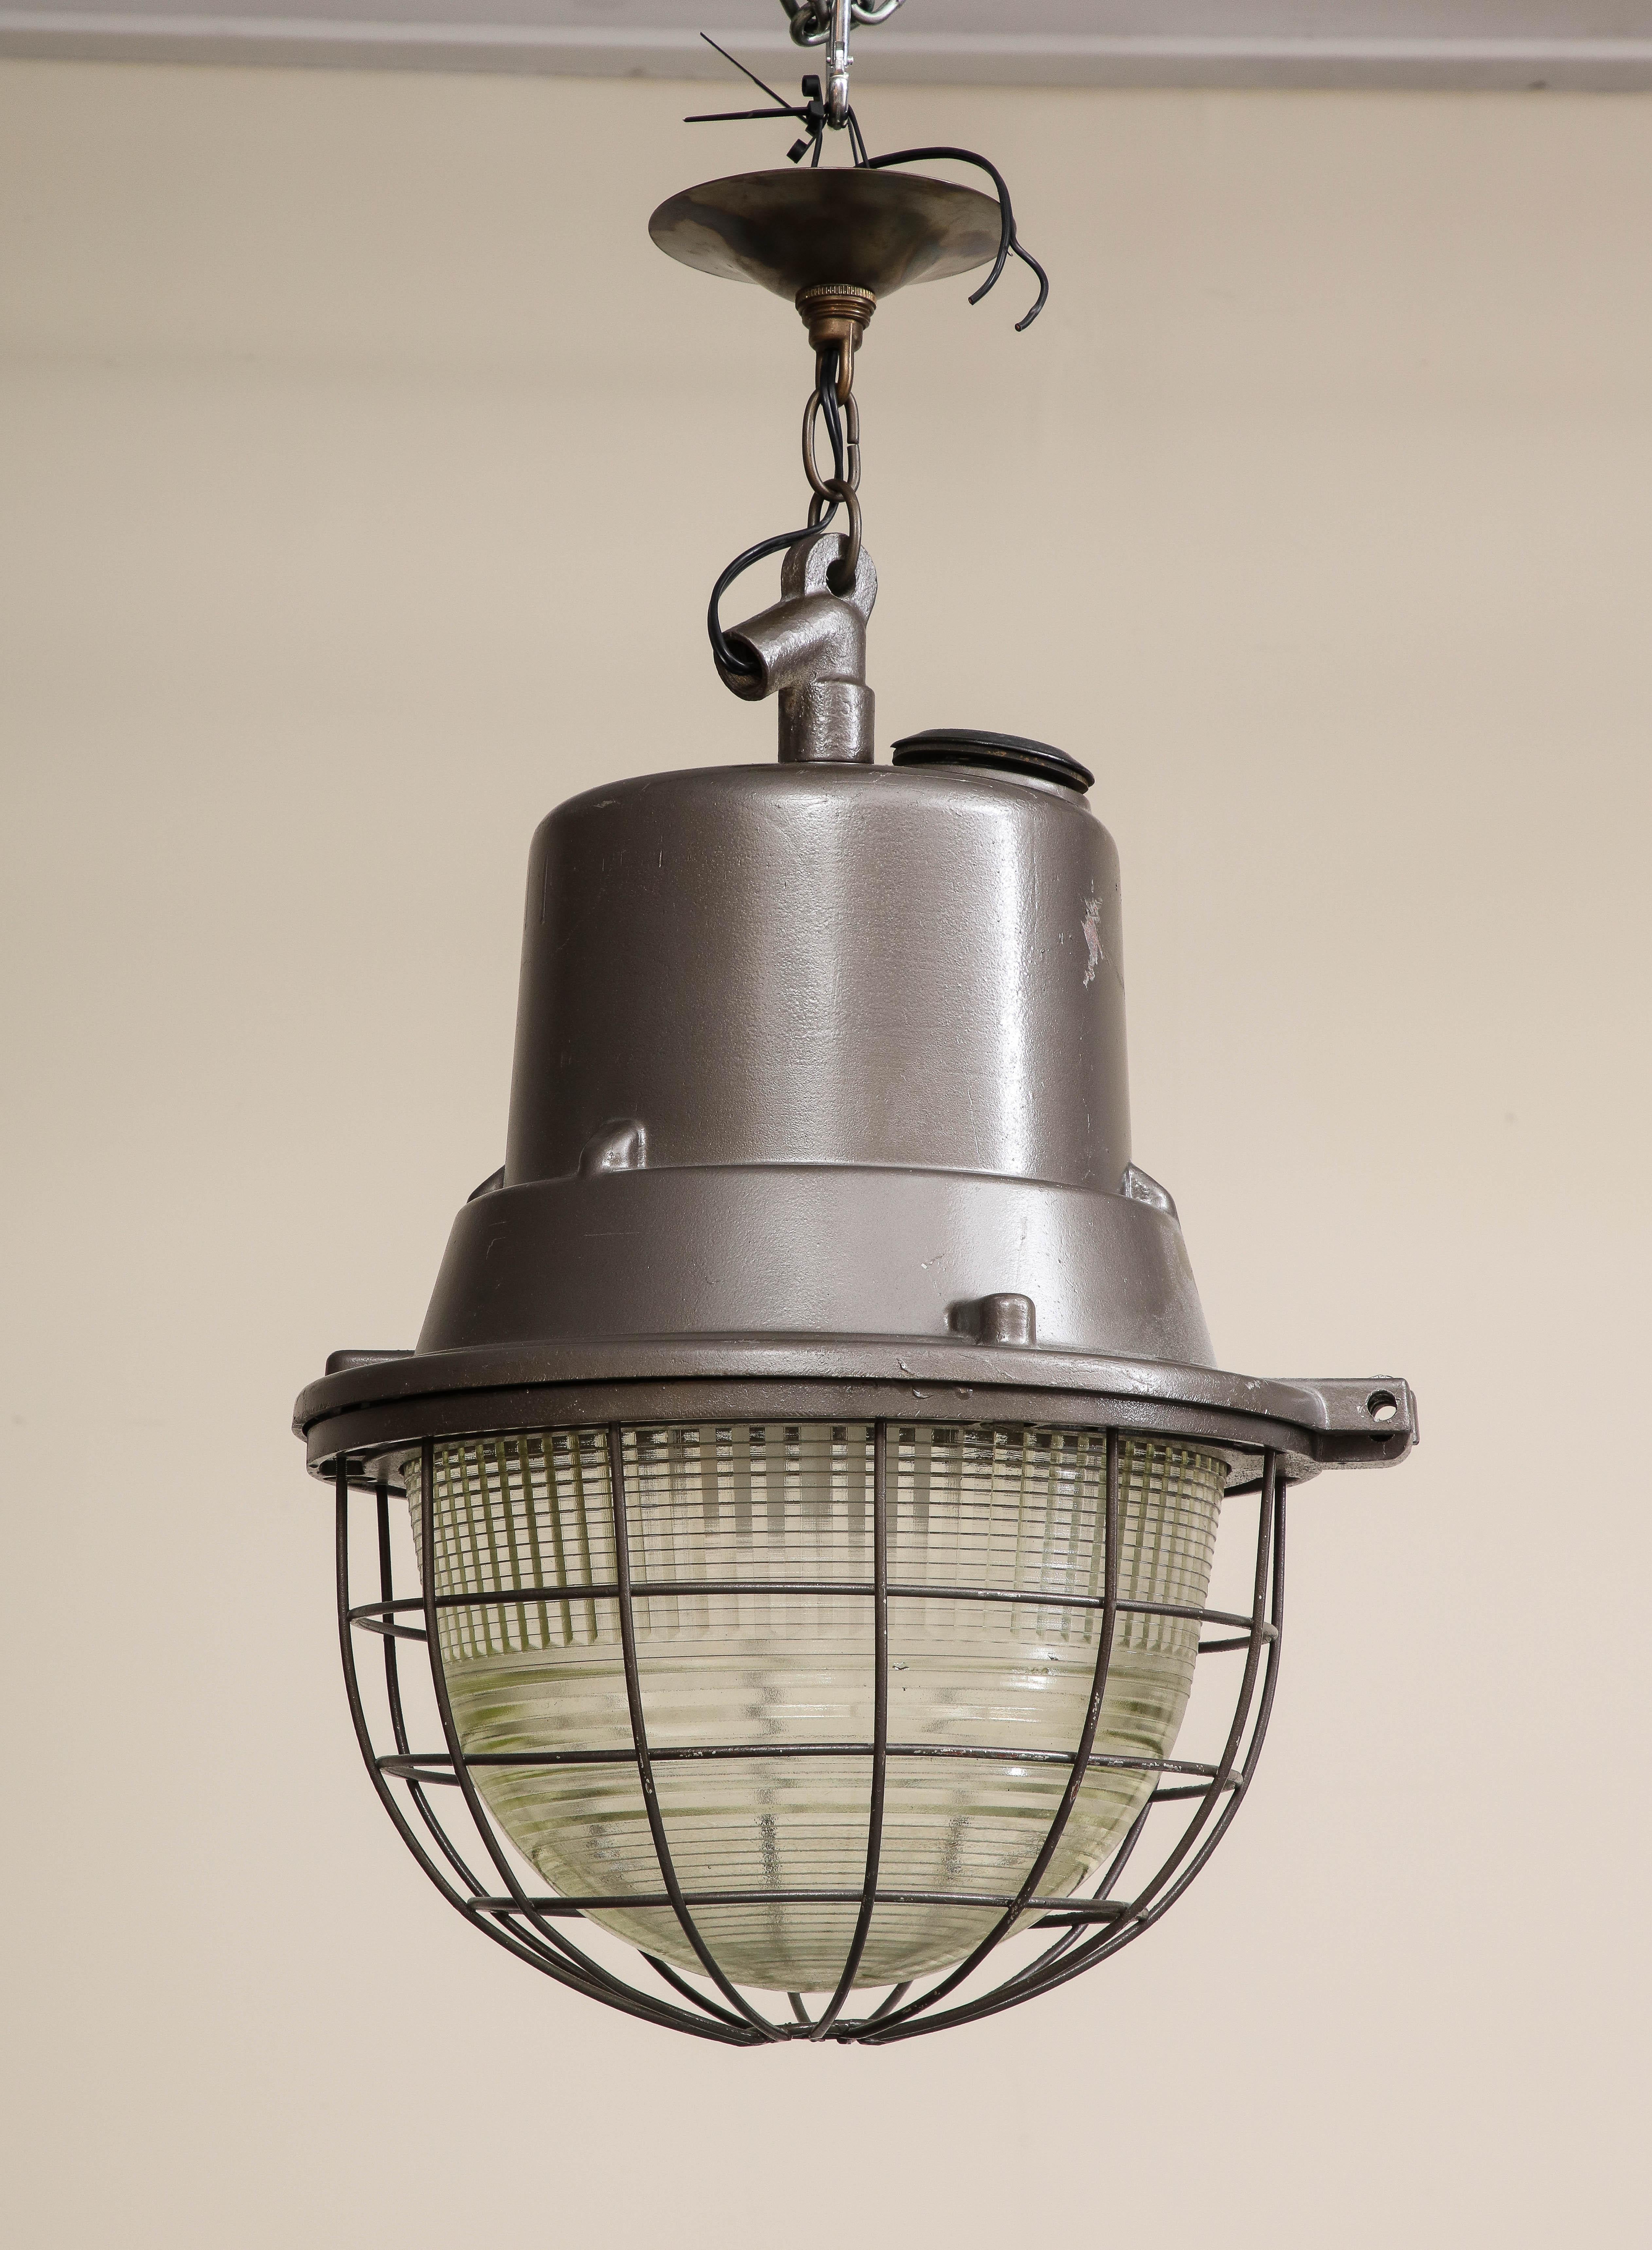 Metal Industrial Pendant Light with Original Glass, c. 1940 For Sale